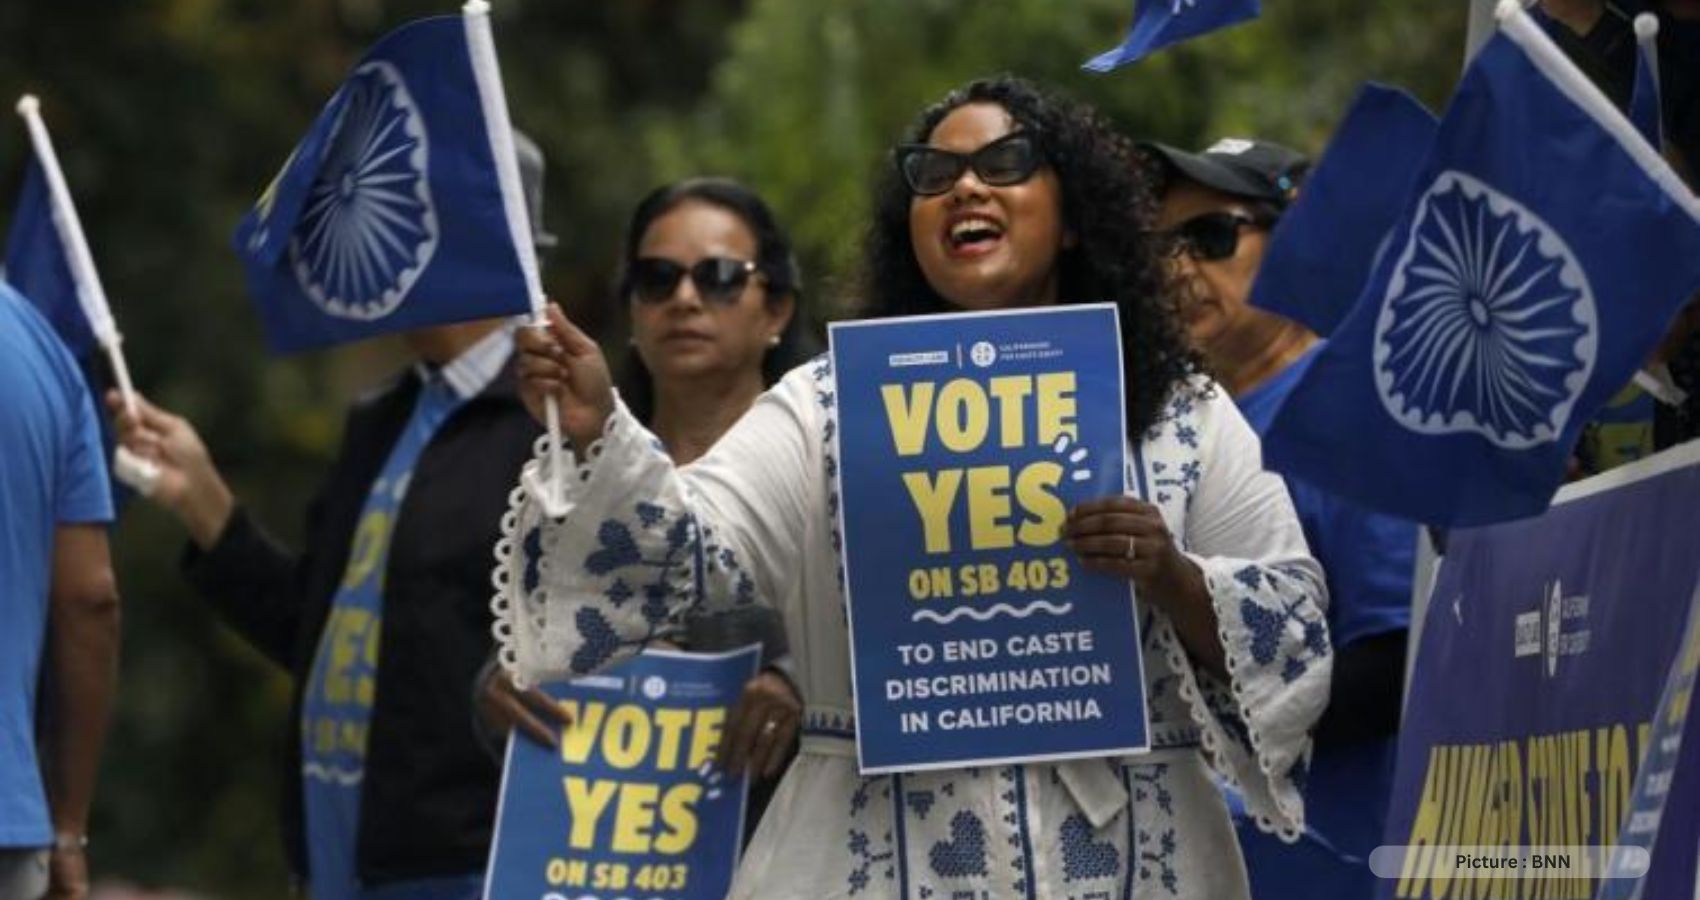 Mixed Reactions After CA Governor Vetoes Caste Discrimination Bill